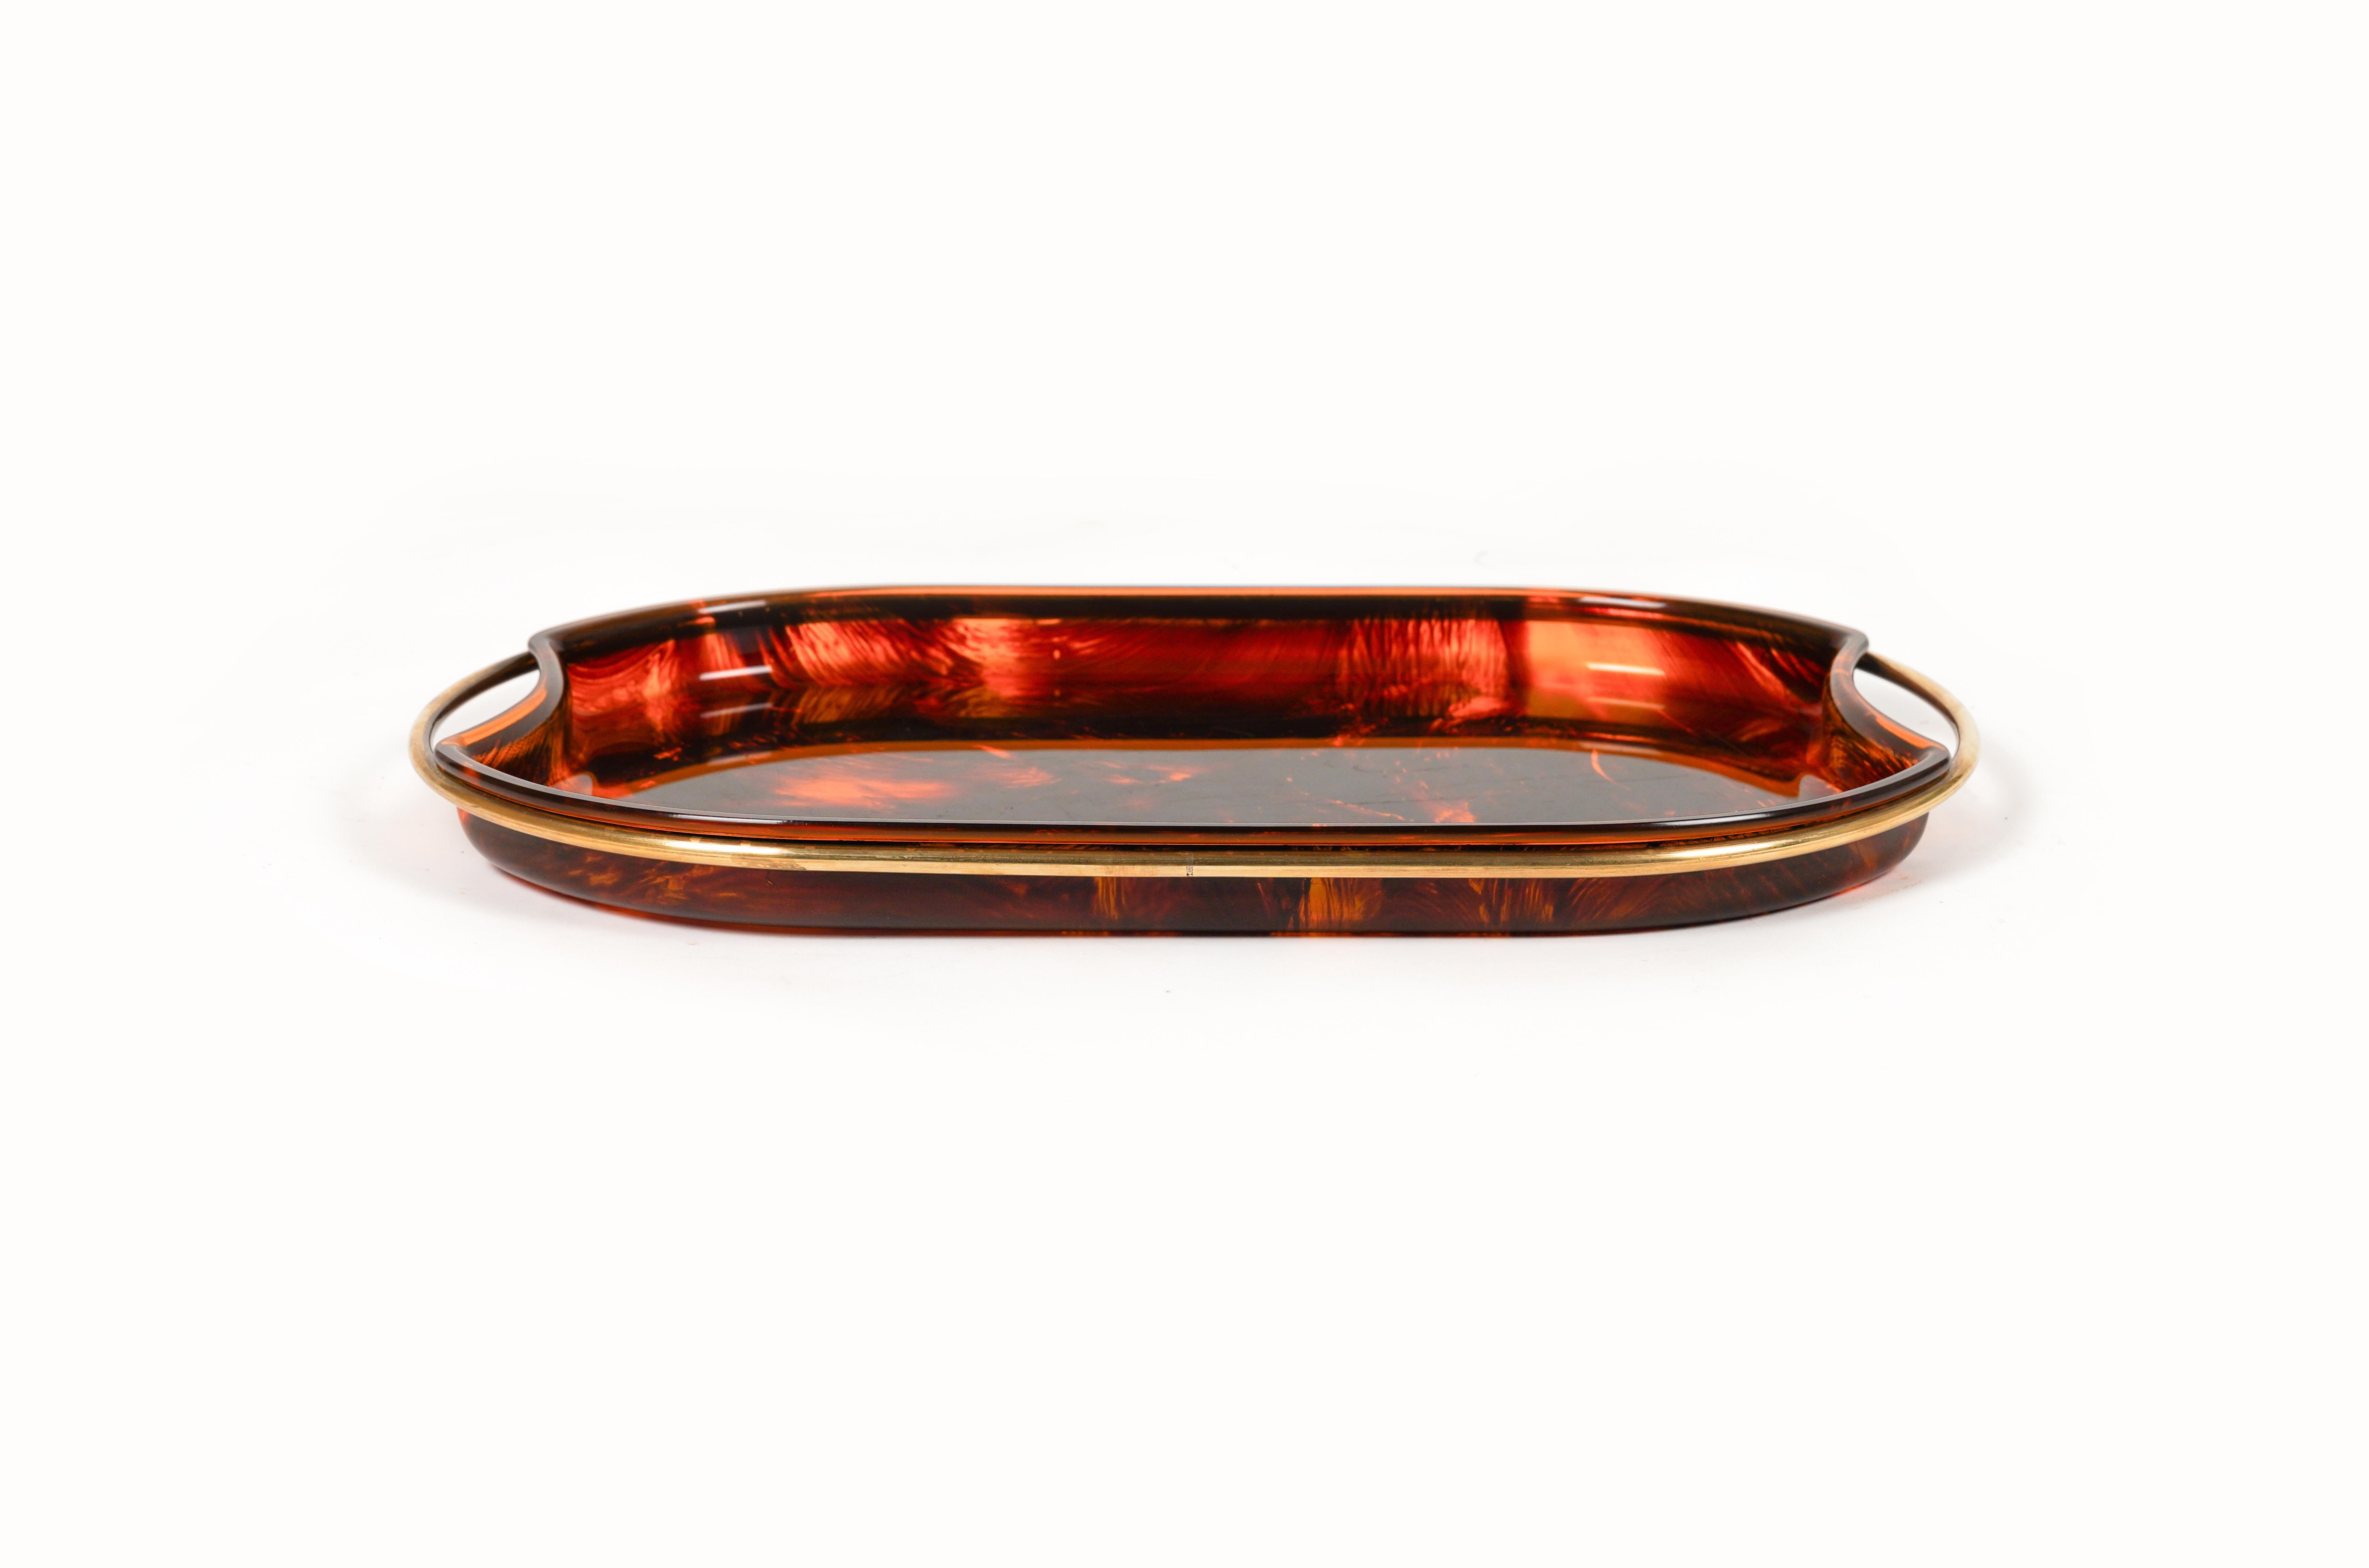 Oval Serving Tray in Effect Tortoiseshell Lucite & Brass by Guzzini, Italy 1970s For Sale 2